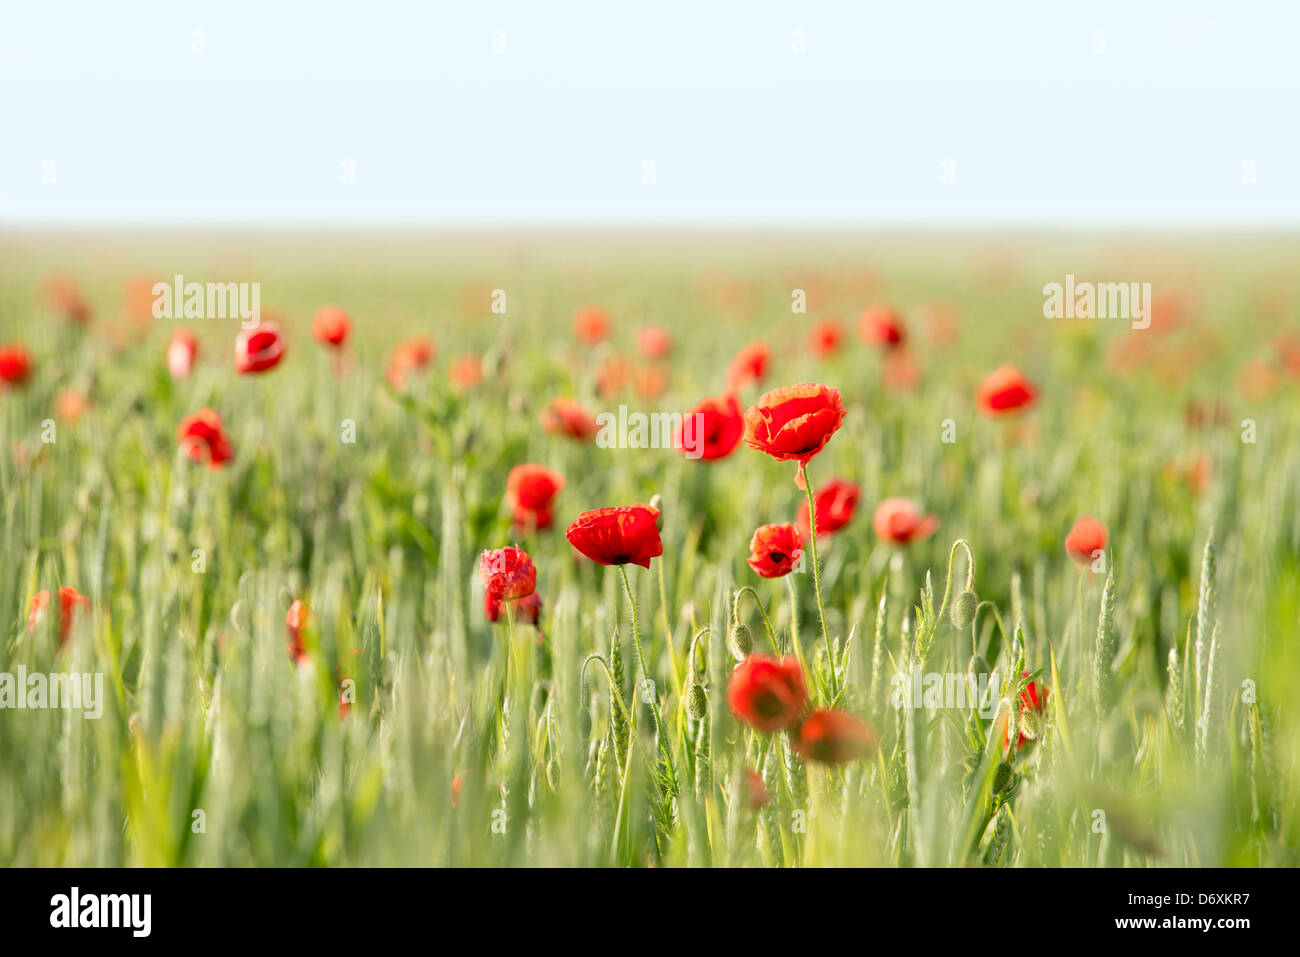 Blooming red Corn poppies (Papaver rhoeas) Stock Photo